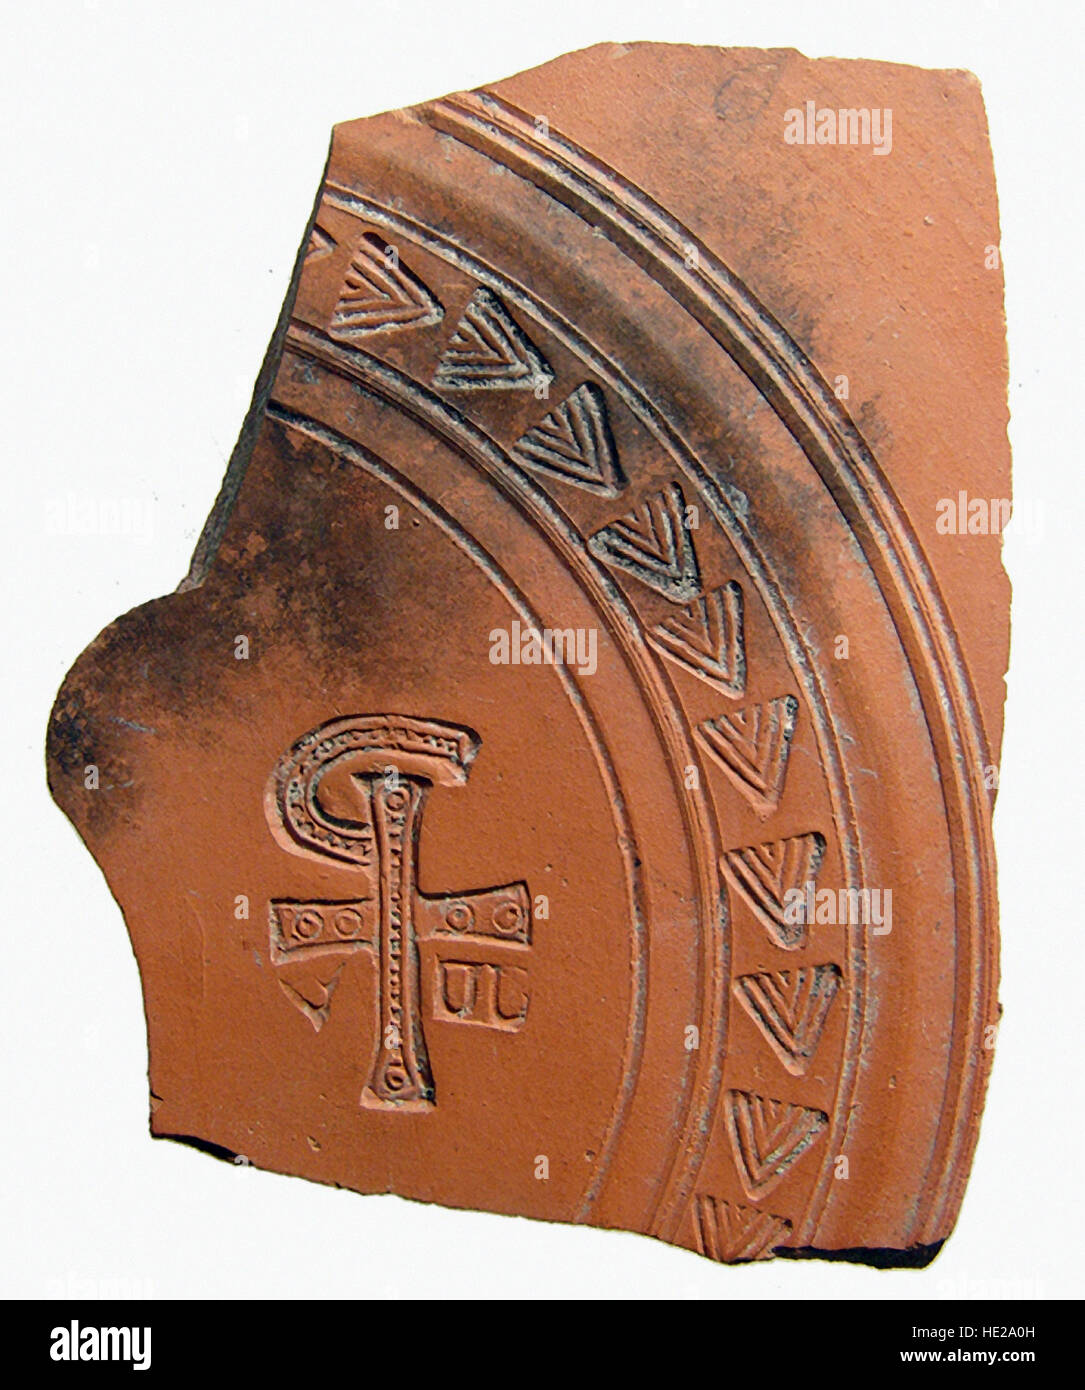 6017. Roman (North Africa) pottery sherd depicting the ‘Chi Rho’, a combination of letters that forms an abbreviation for the name of Jesus Christ, c. Stock Photo